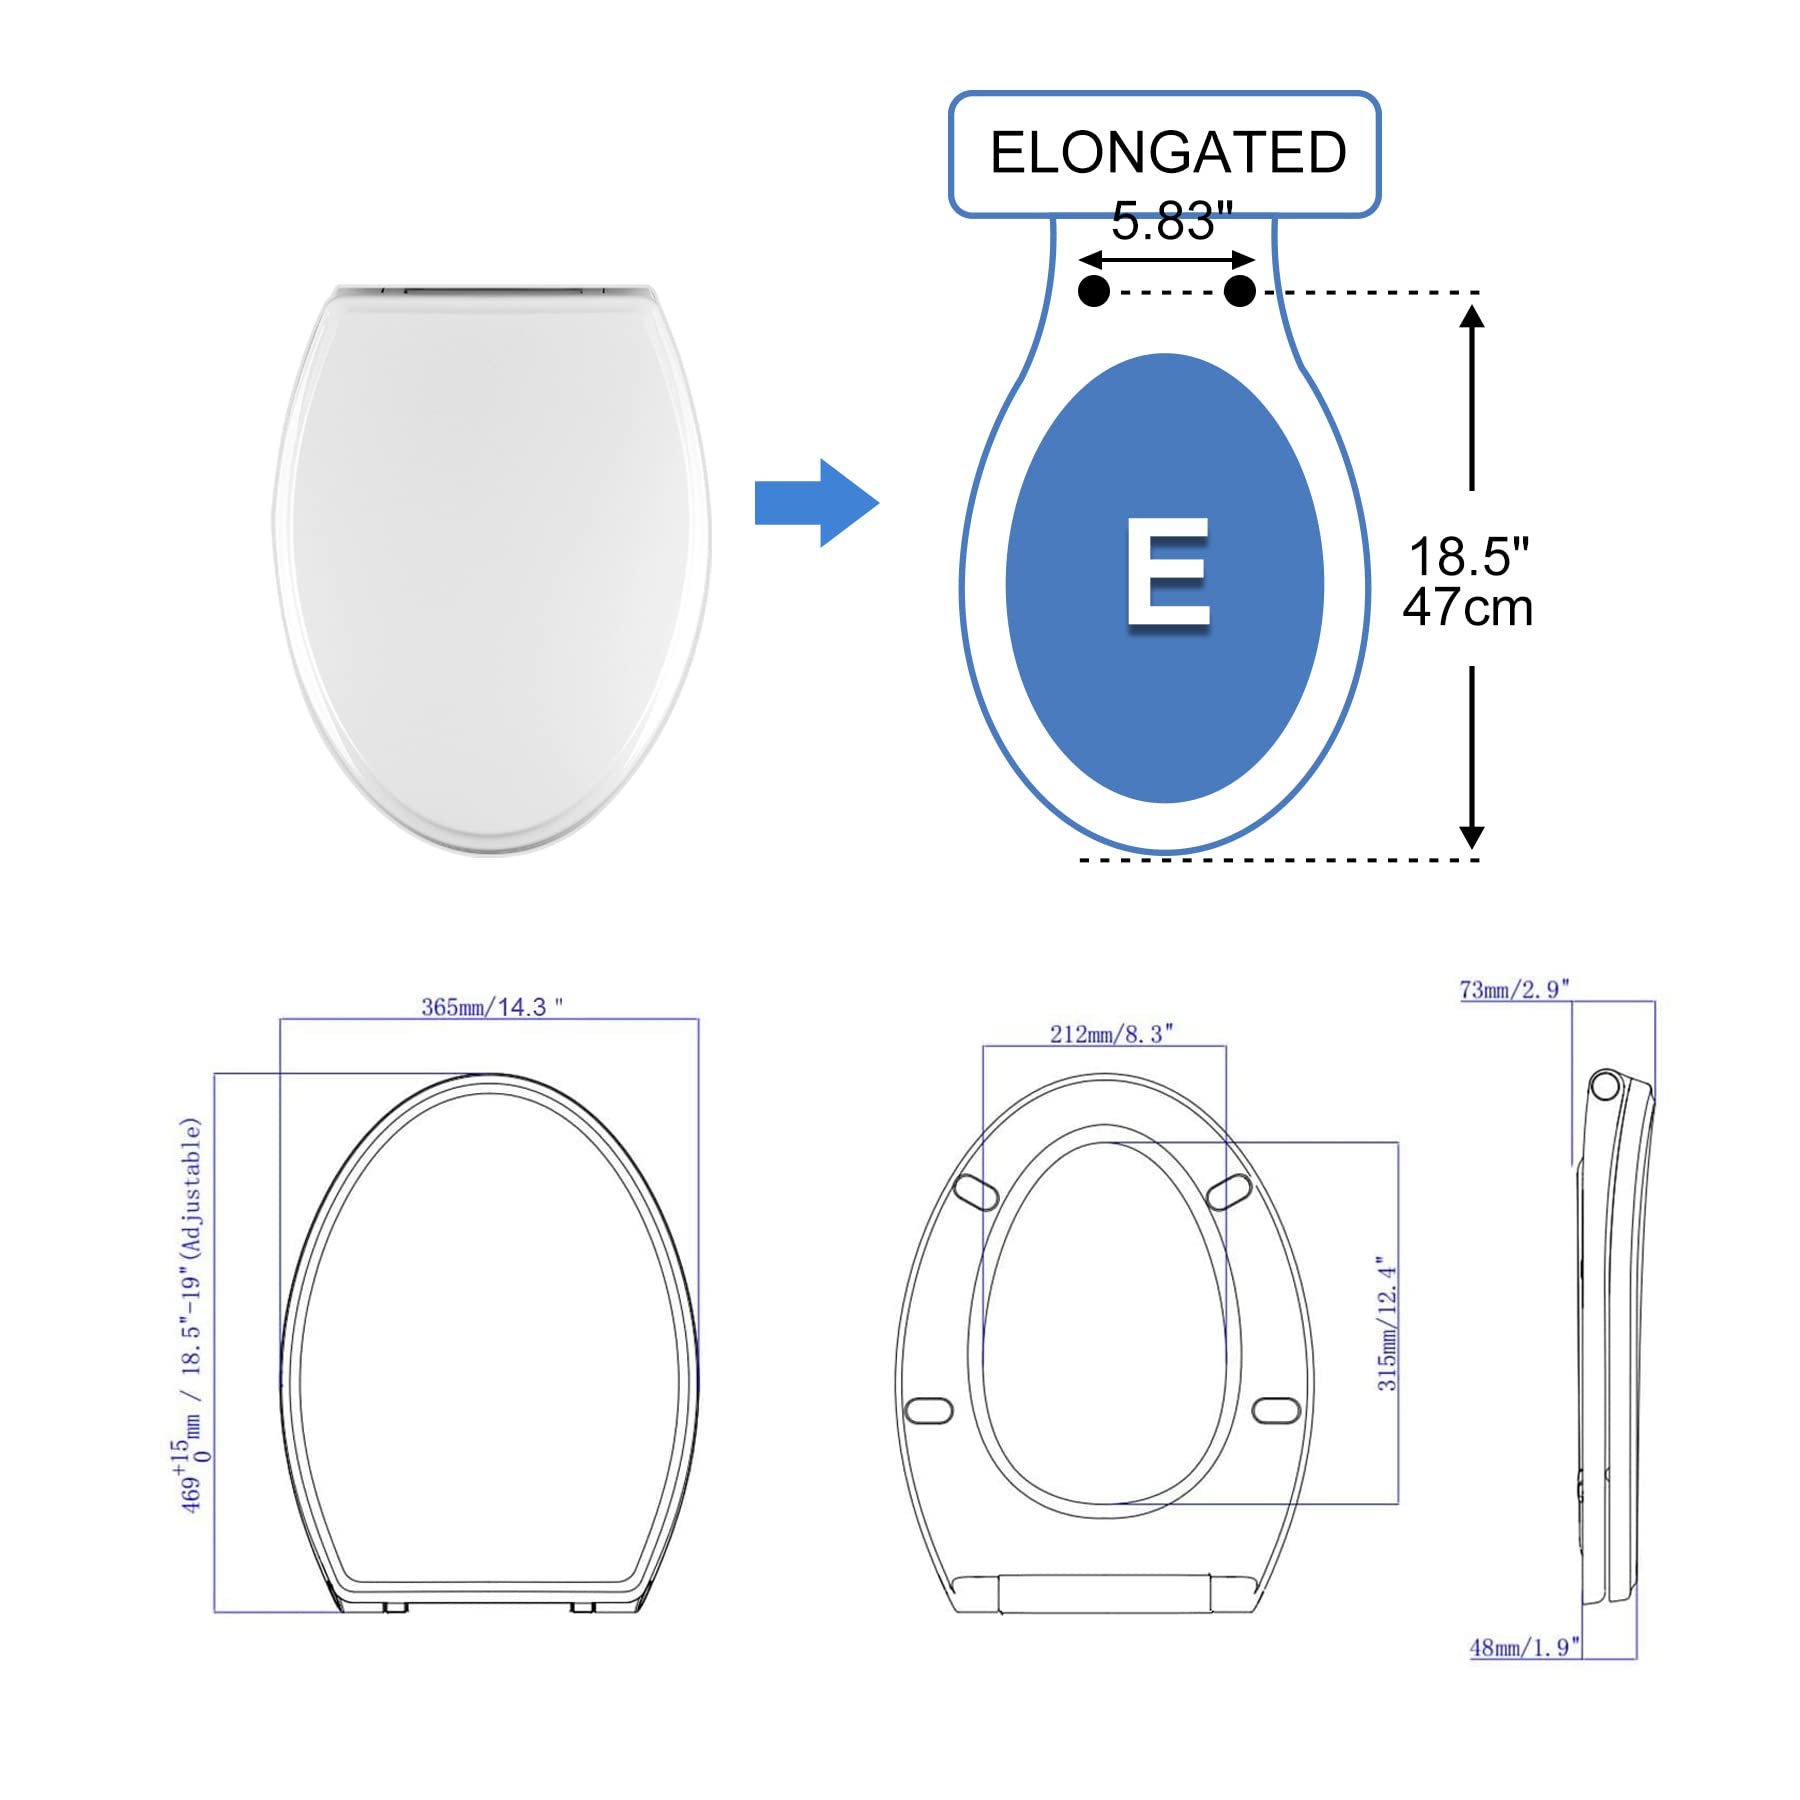 Hibbent Premium Elongated Toilet Seat with Cover(Oval) Quiet Close, One-Click to Quick Release, Easy Installation Never Loosen Hinge, Slow Close Toilet Seat and Cover, Easy Cleaning-White Color